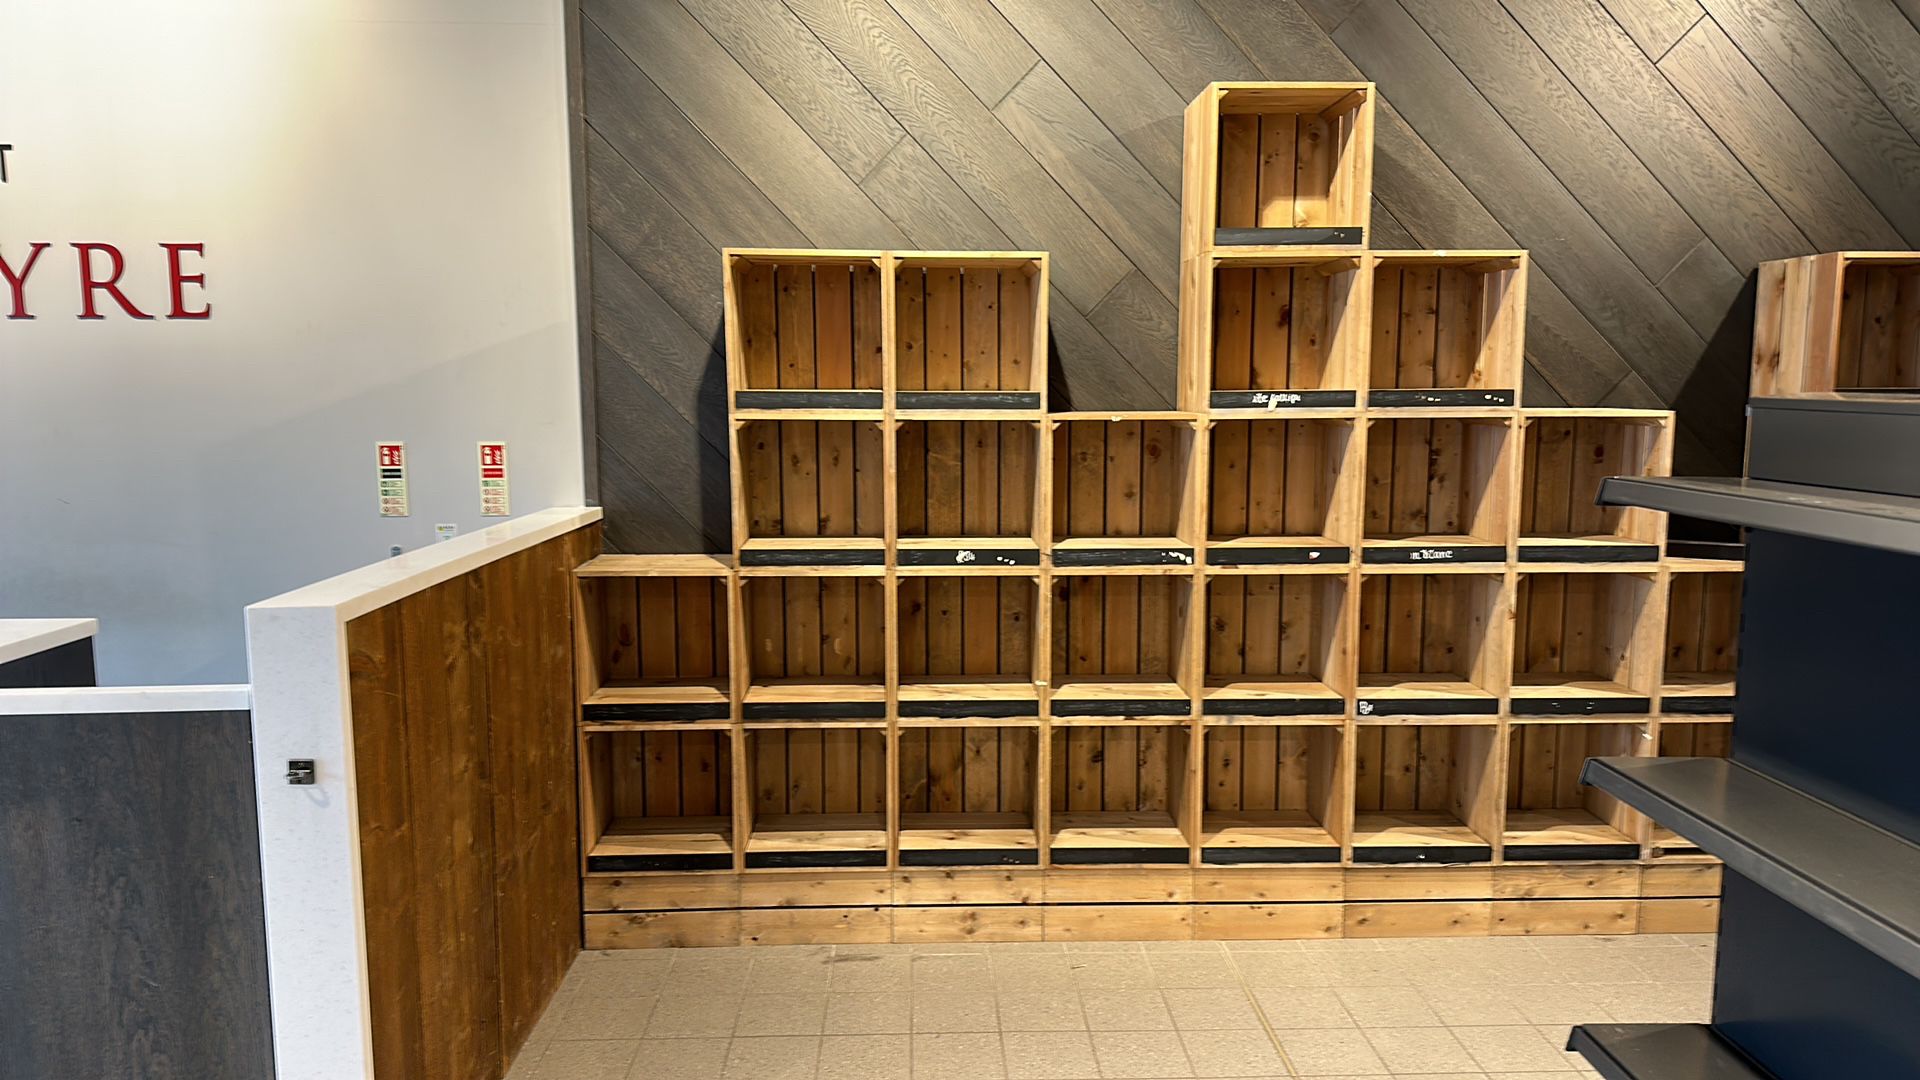 Wooden crate / pigeon hole display or storage - Image 3 of 5